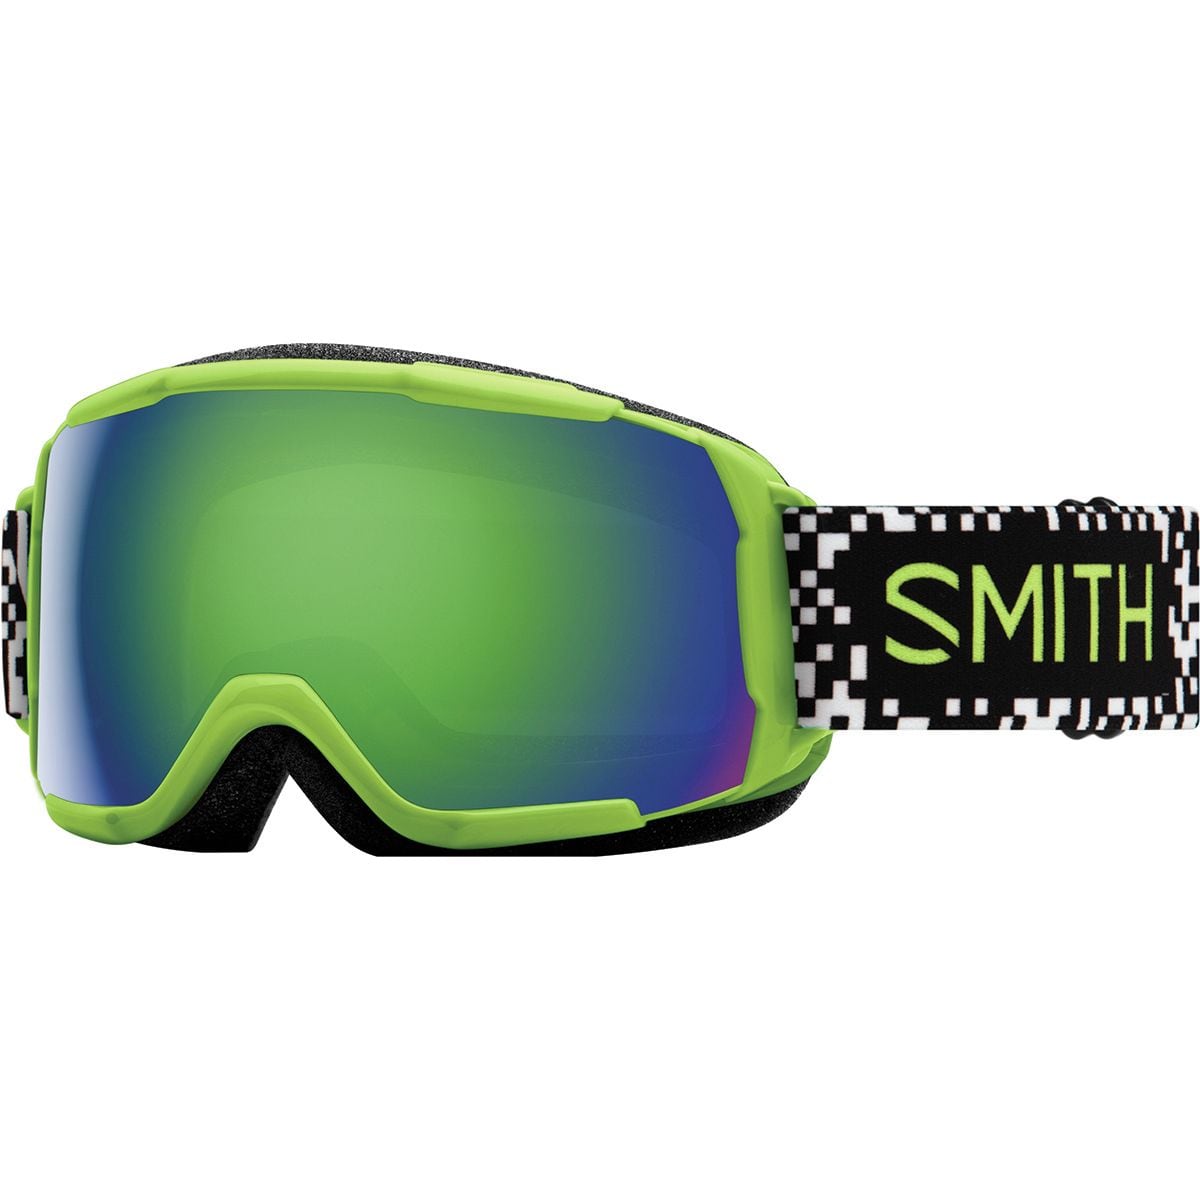 Smith Grom ChromaPop Goggles - Kids' Game Over/Grn Sol-x Mir